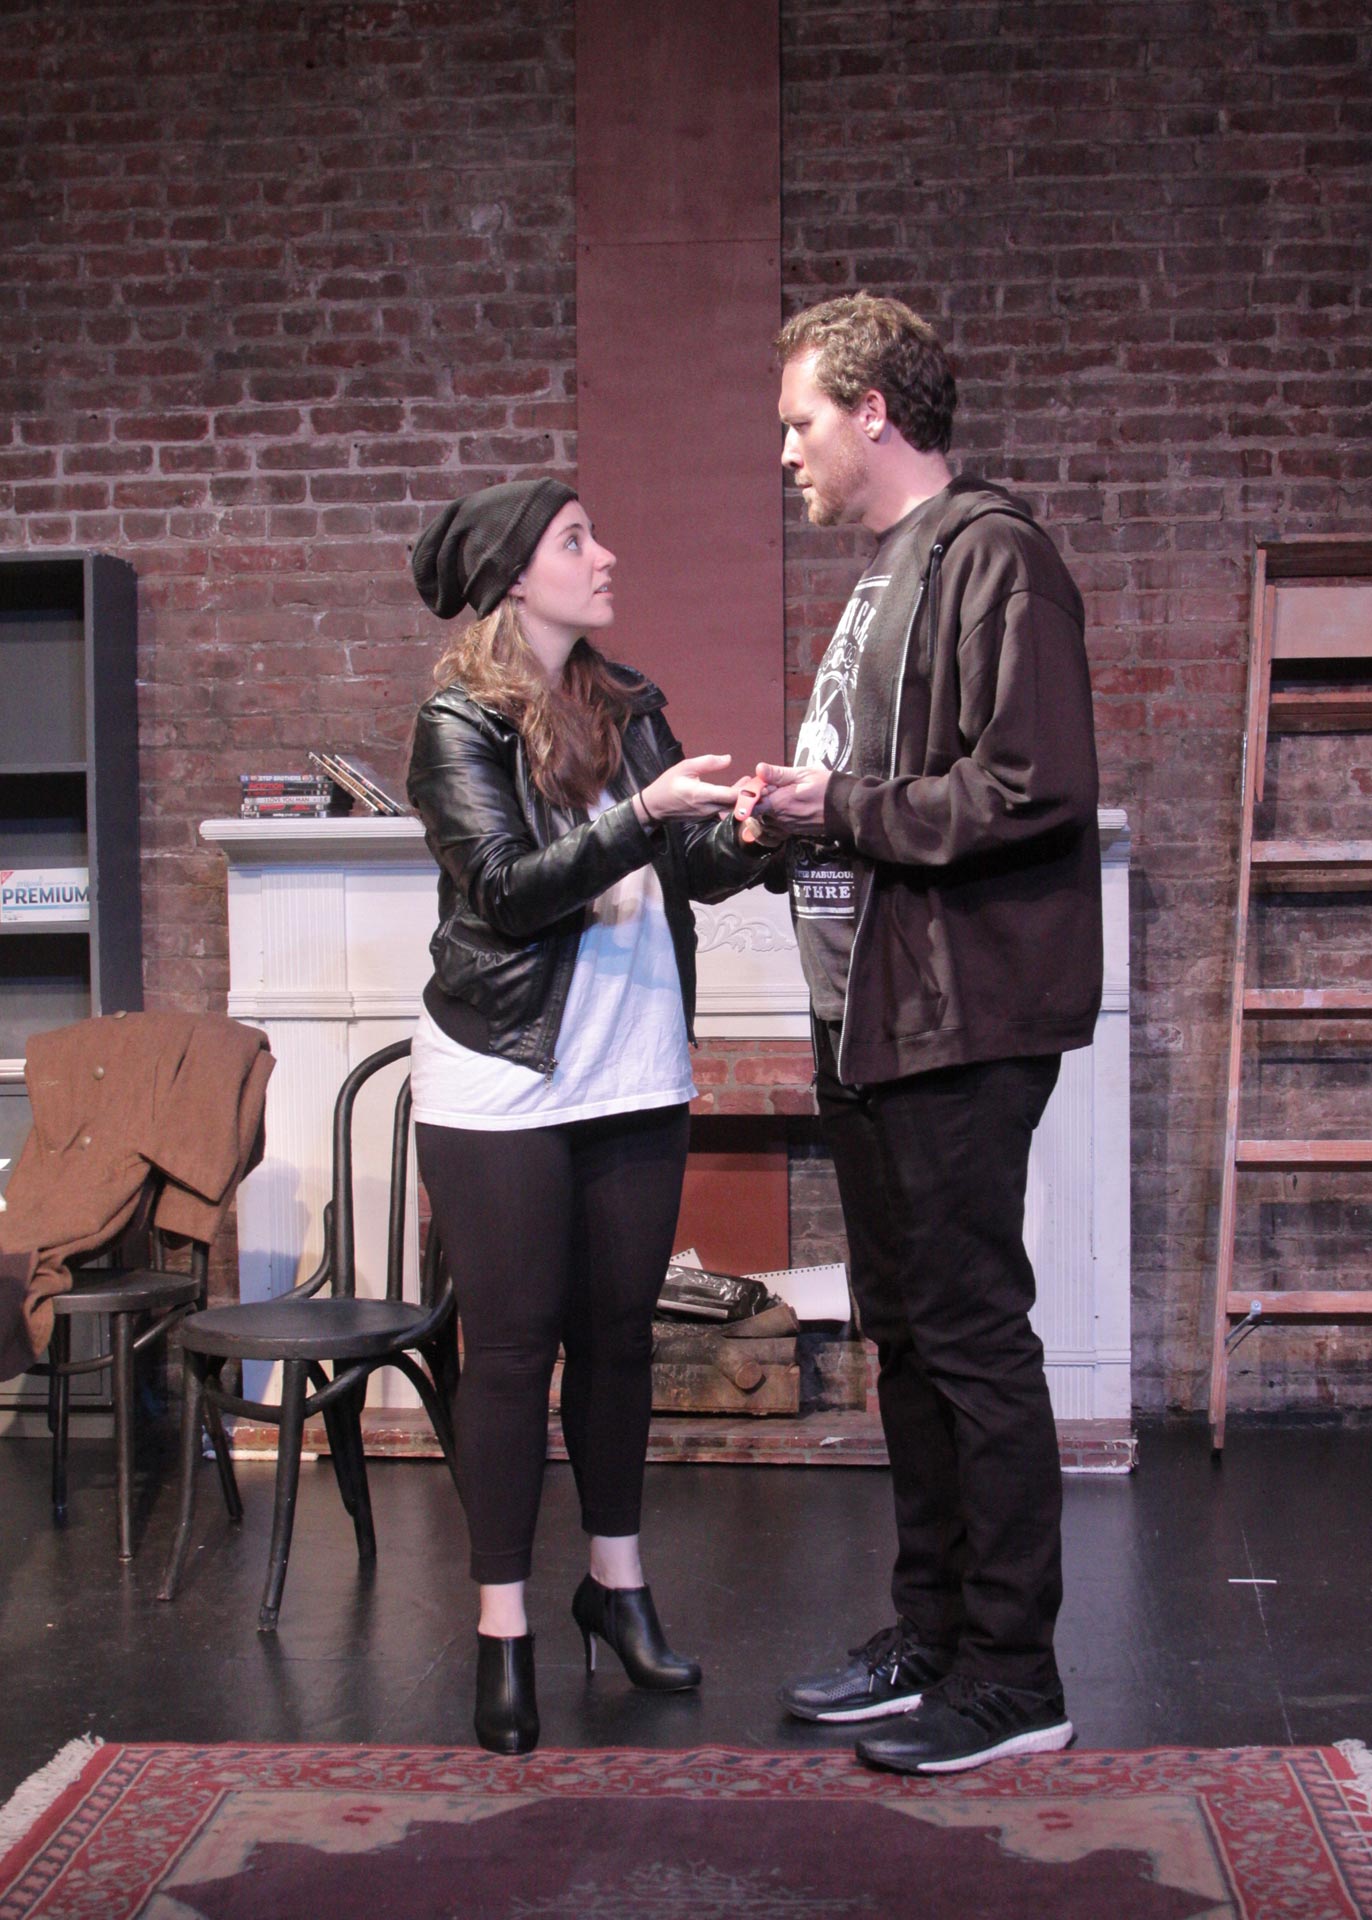 Julia Mulholland as Musetta prepares to sells her Apple Watch with William O’Neill as Marcello in Opera on Tap’s production of La Bohème.